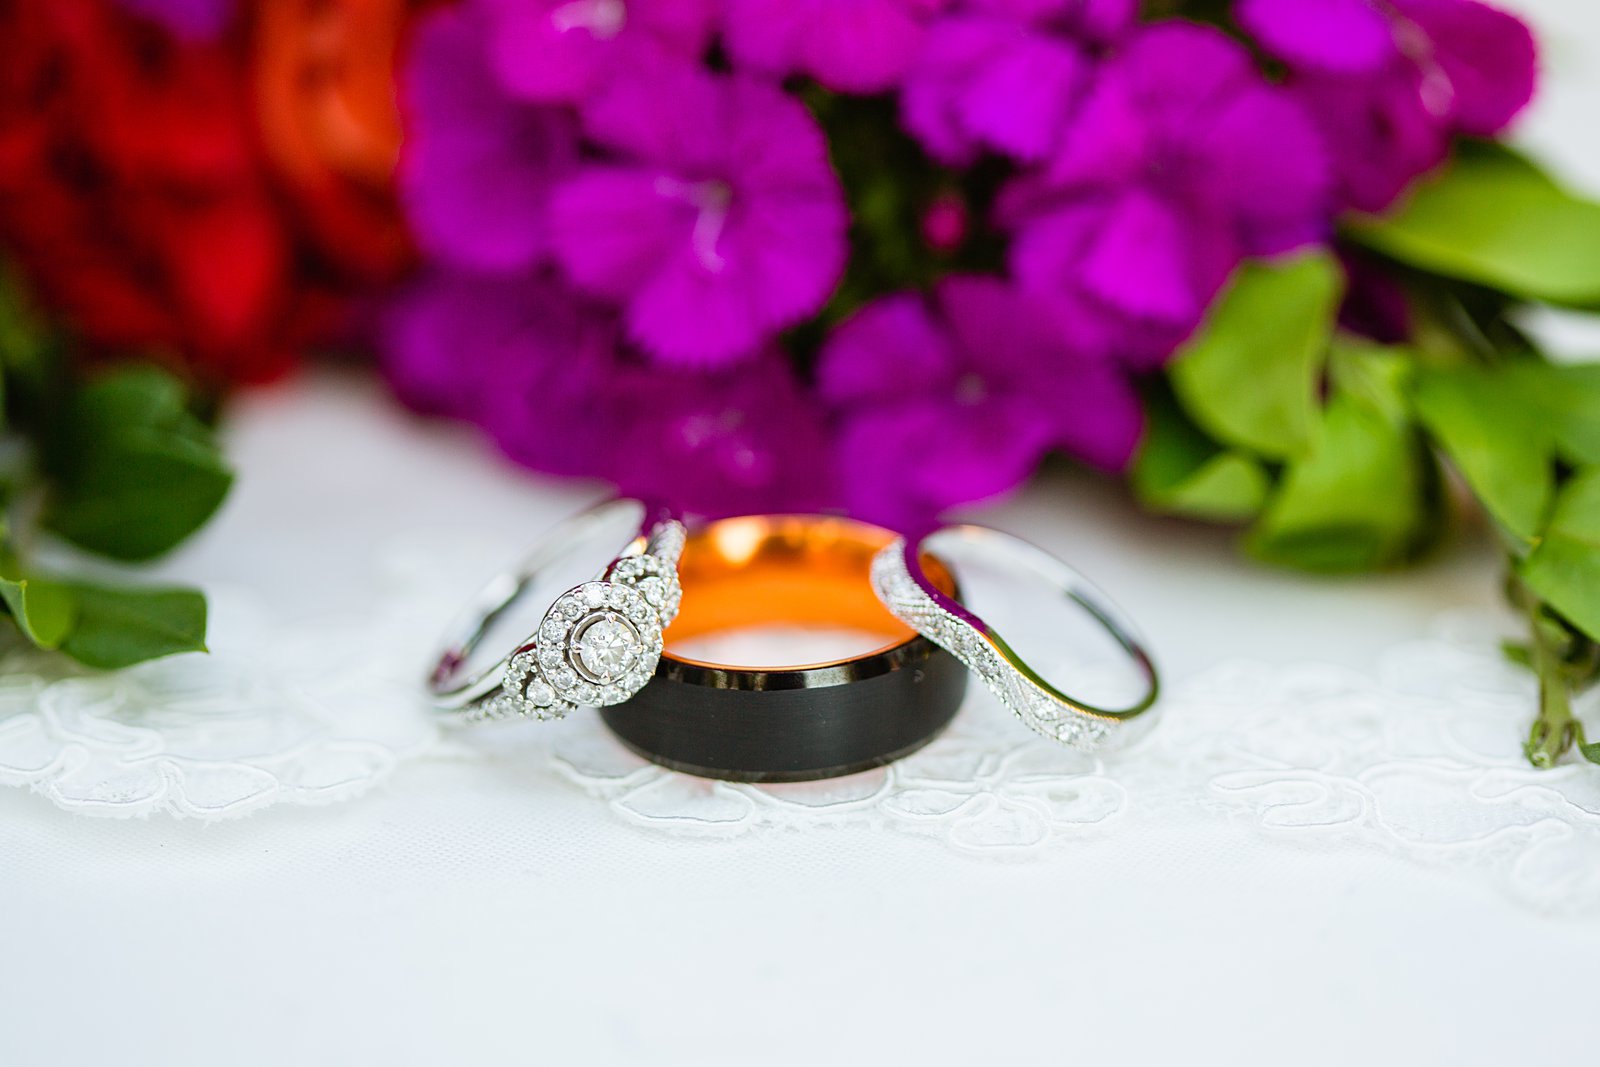 Bride and grooms wedding bands with groom's alternative black and orange Manly Bands weding ing by PMA Photography.